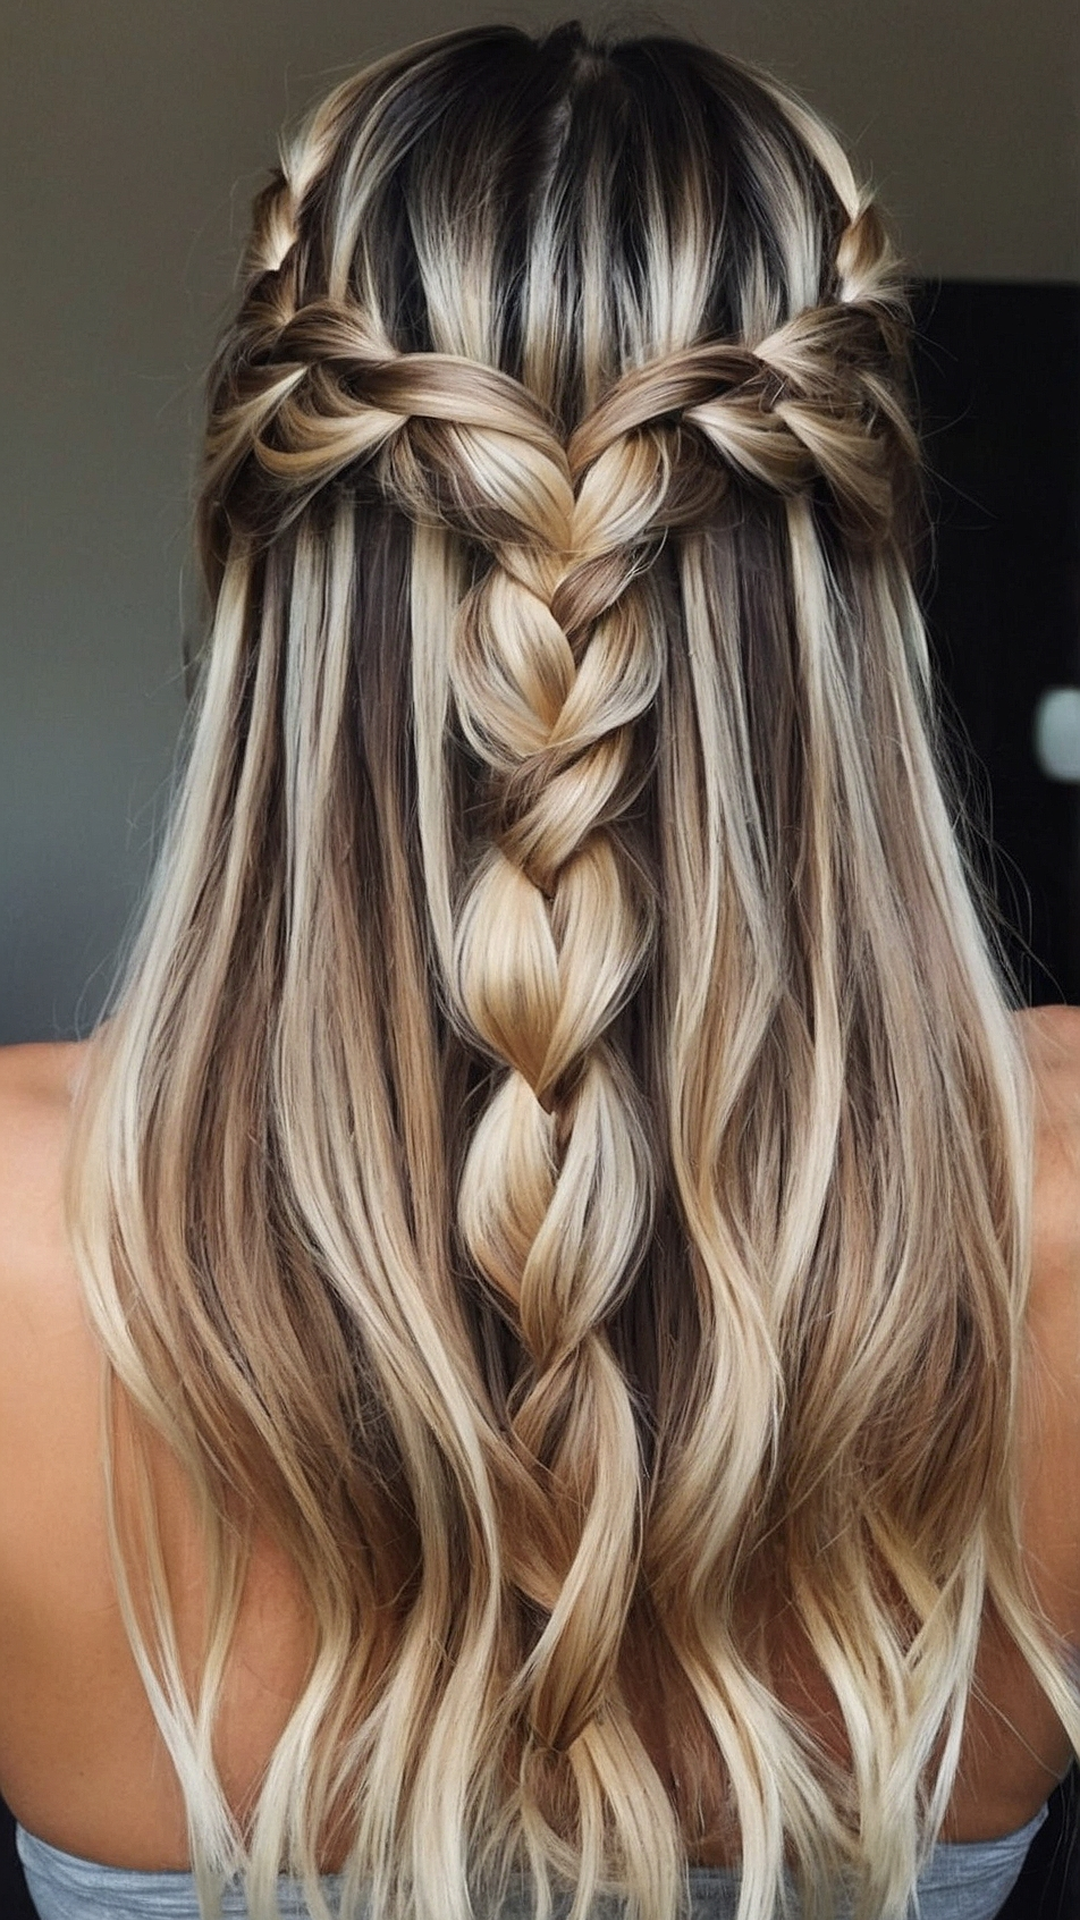 Chic and Braided: Hairdo Masterpieces